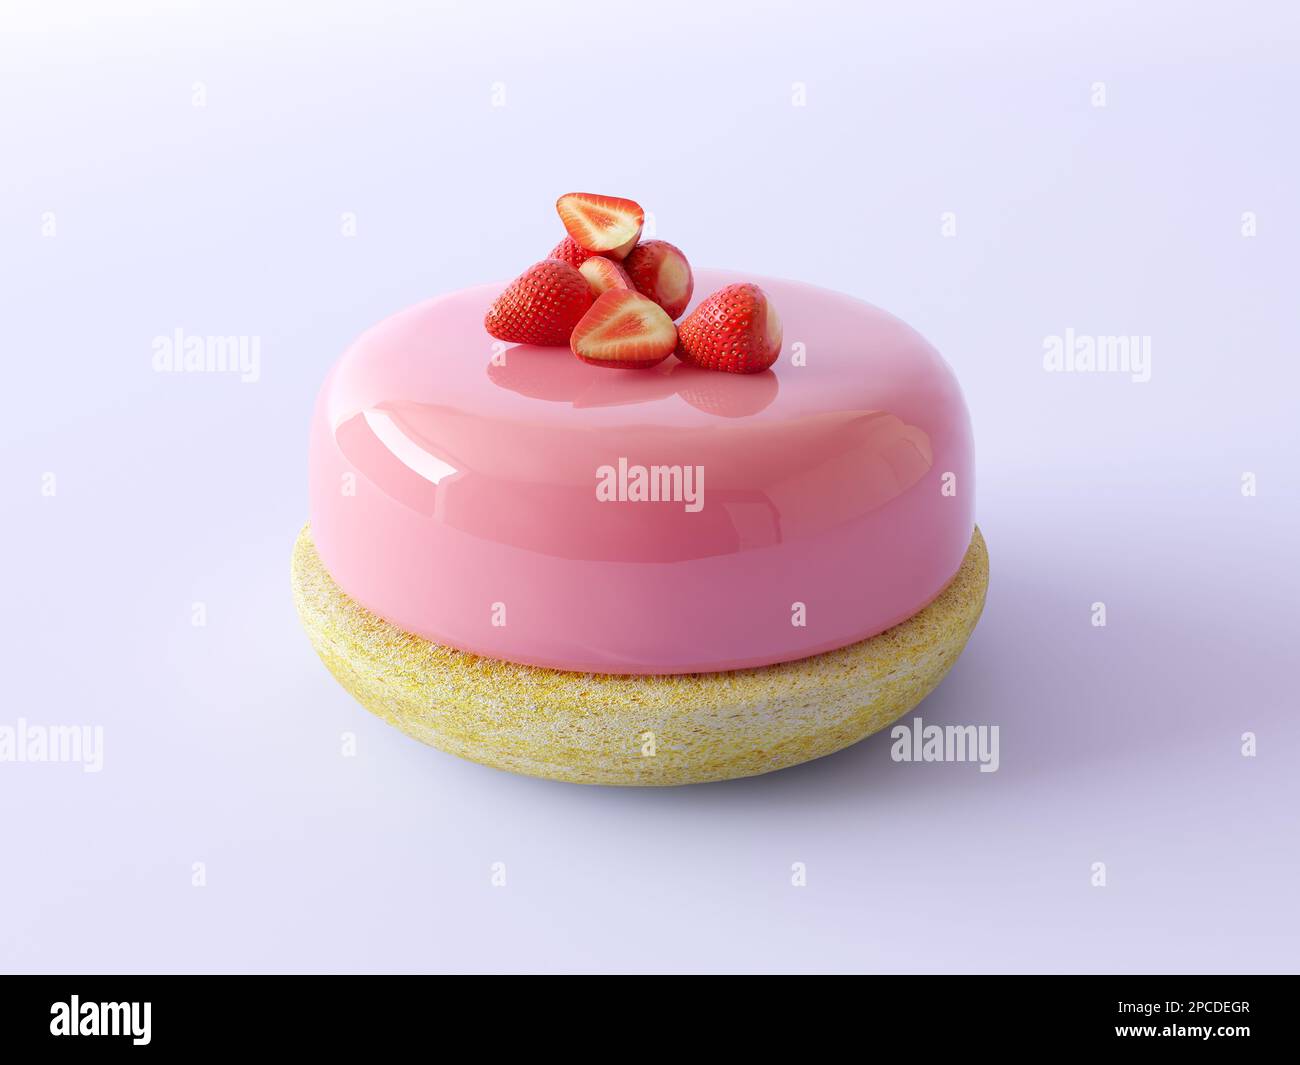 Trendy strawberry mousse cake with pink mirror glaze. Decorated by fresh slice of strawberries. Isolated on pastel background. Assortment picture Stock Photo